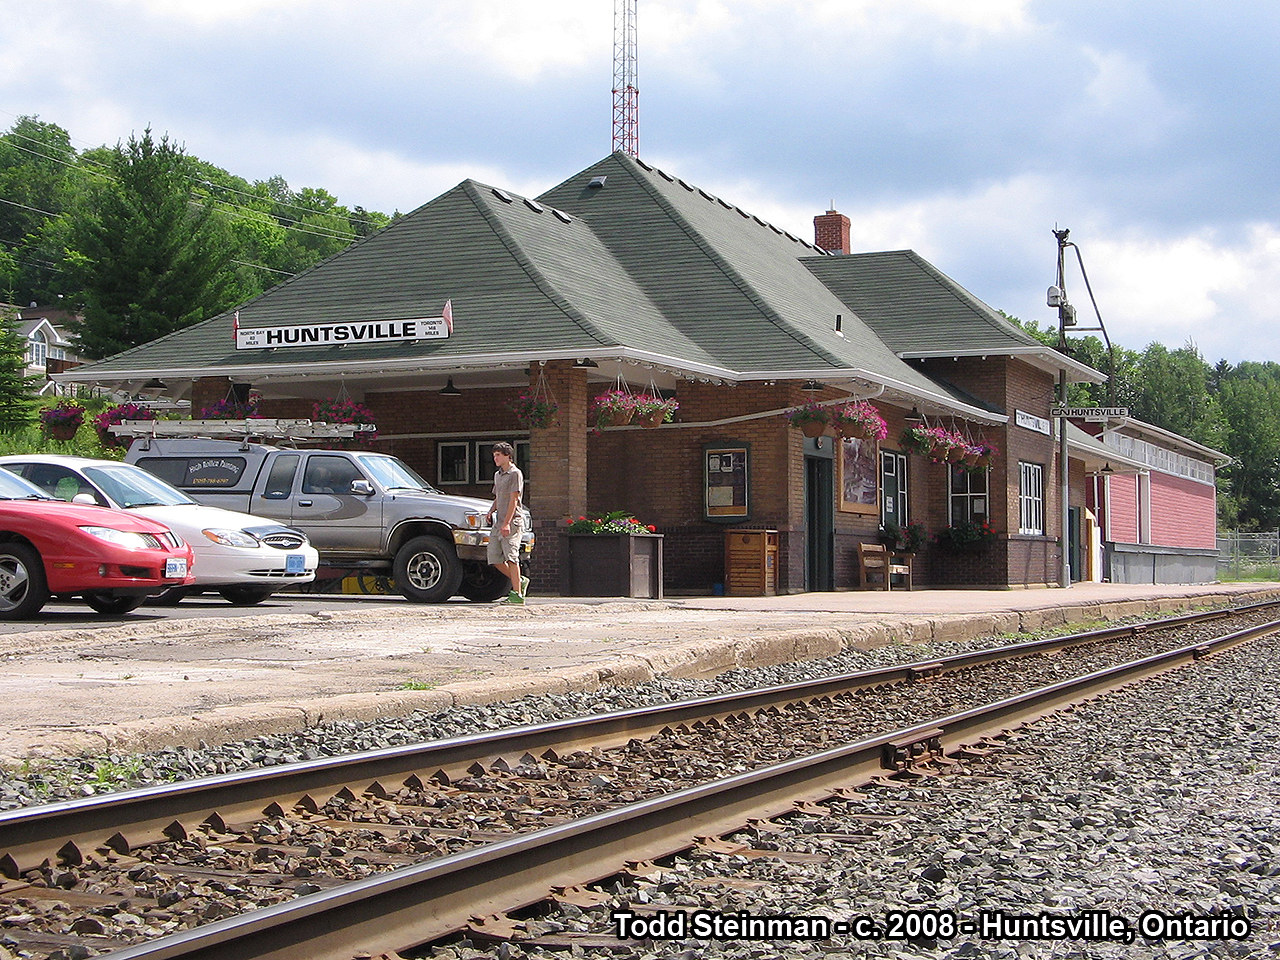 The parking lot is full, as most of the passengers wait inside for the extremely late Northlander at the Huntsville station. The station was nicely restored, and the town had plans to use it as an intermodal facility (bus, train, etc.).